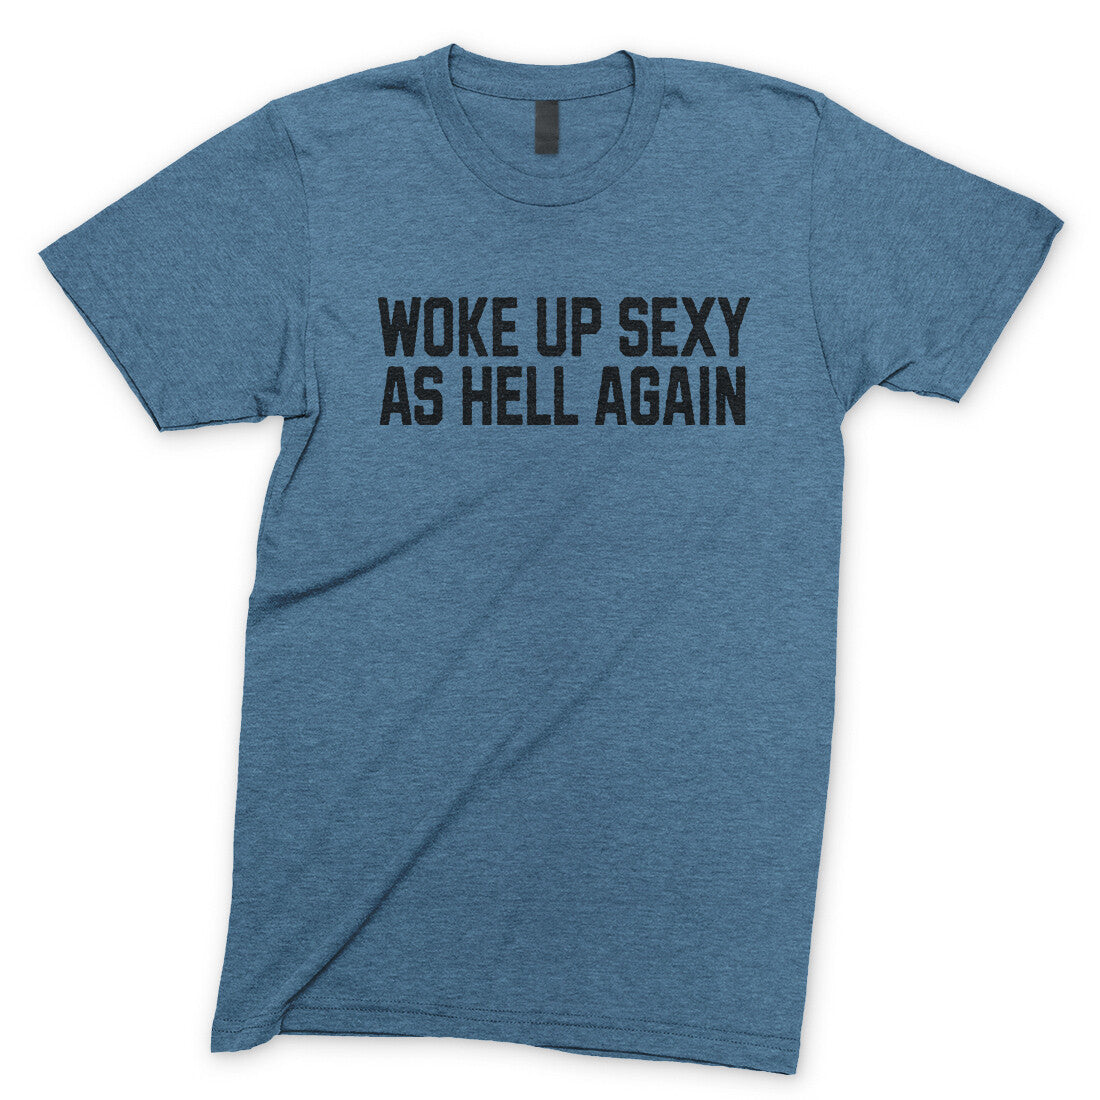 Woke Up Sexy as Hell in Heather Indigo Color